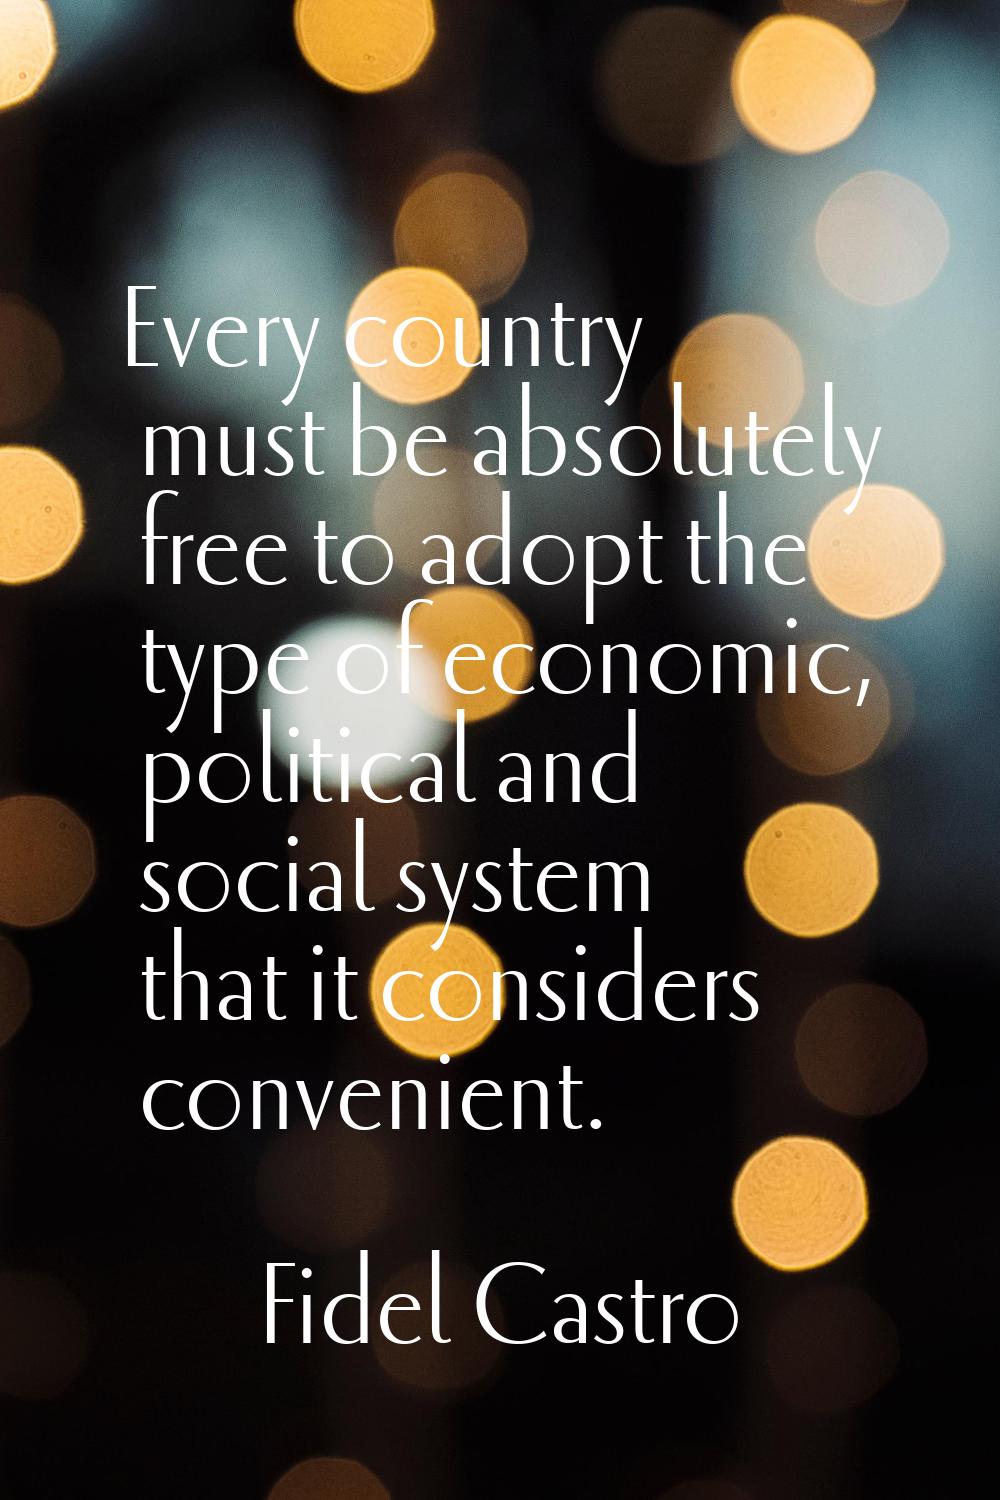 Every country must be absolutely free to adopt the type of economic, political and social system th